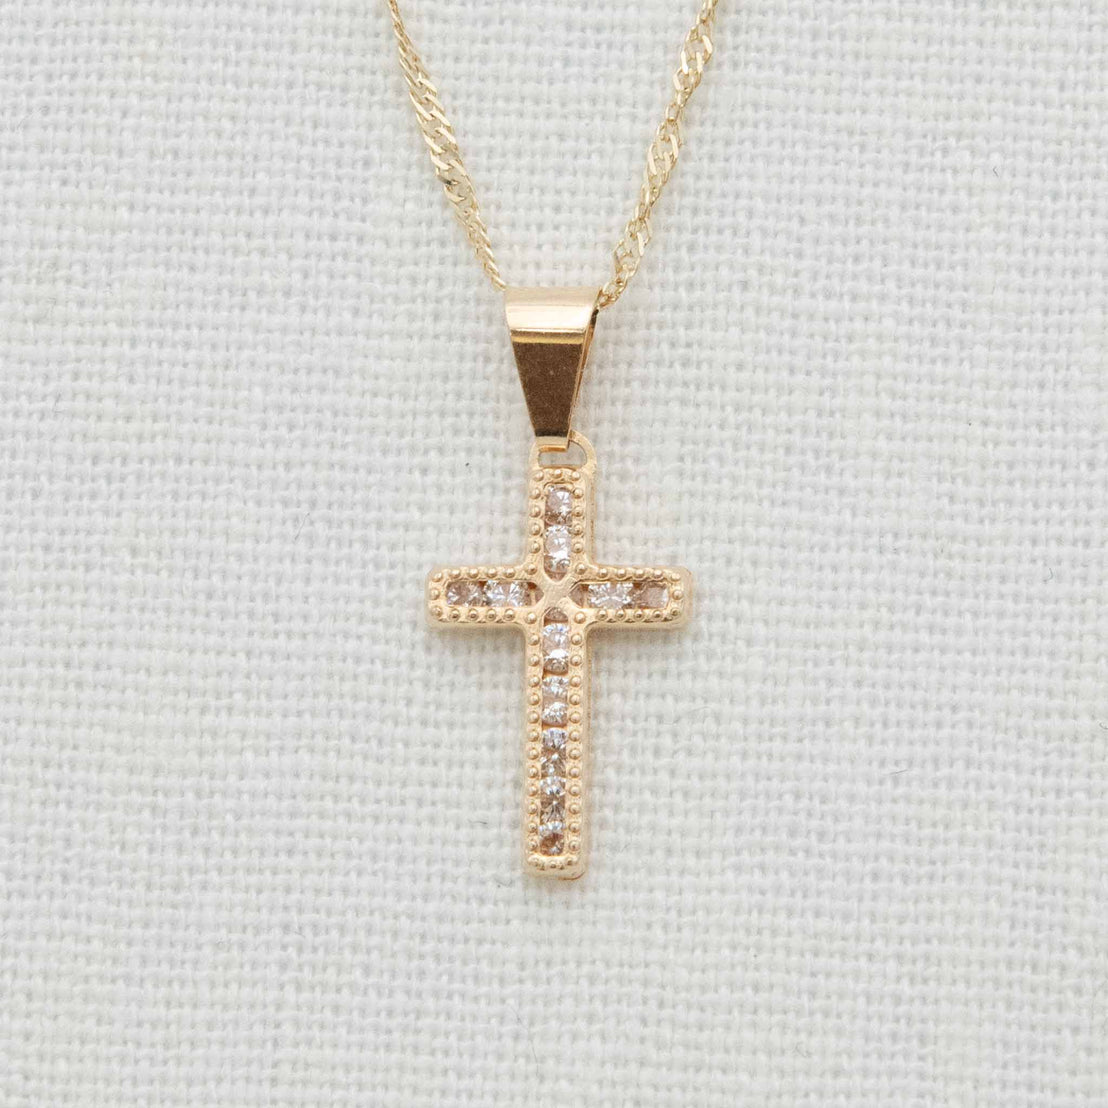 Gold and cubic zirconia cross necklace detail